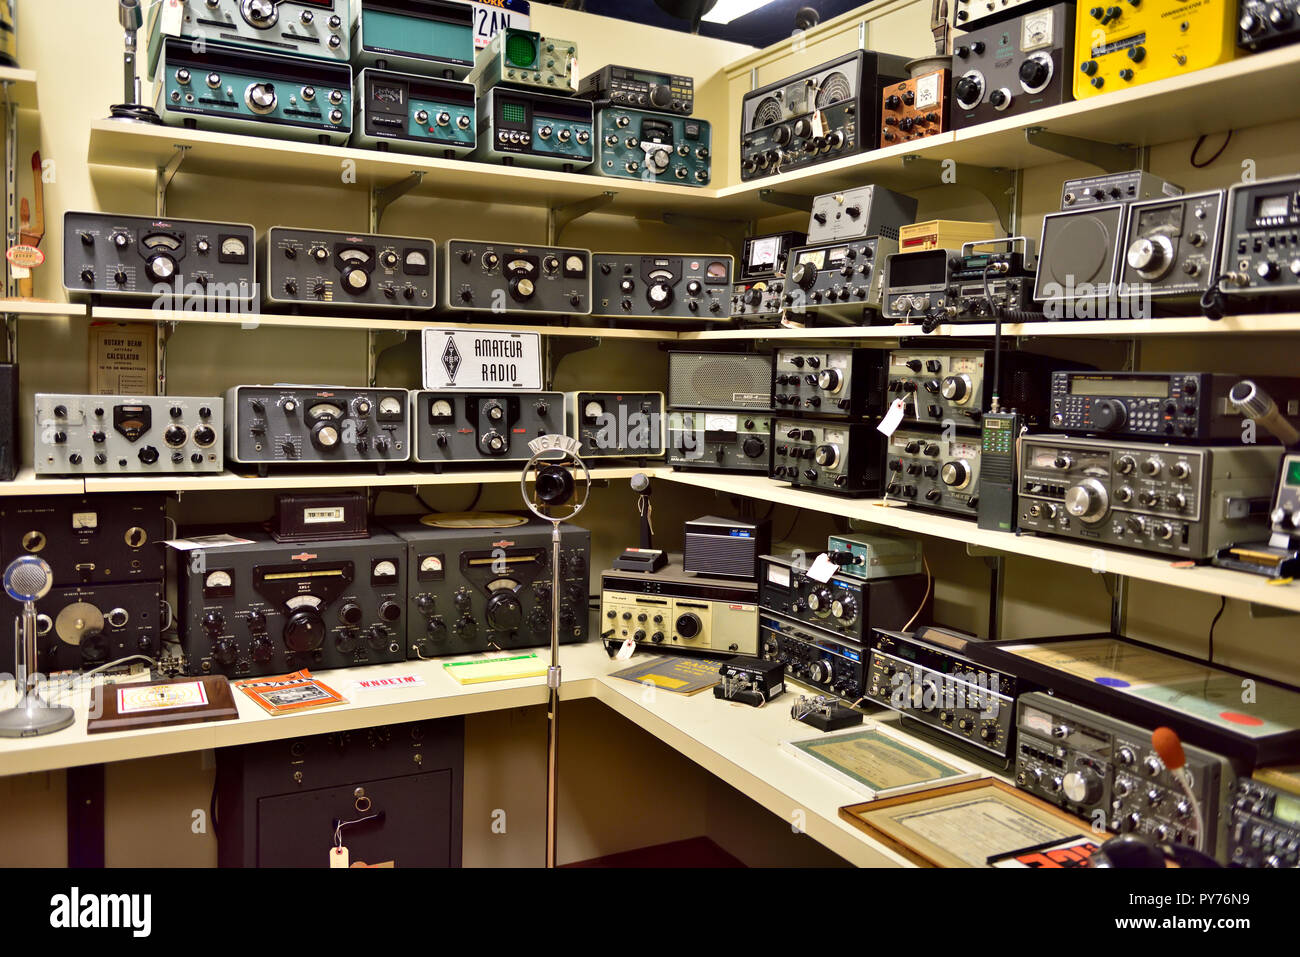 Display of ham radio equipment at Antique Wireless Museum in Bloomfield NY, USA, Stock Photo